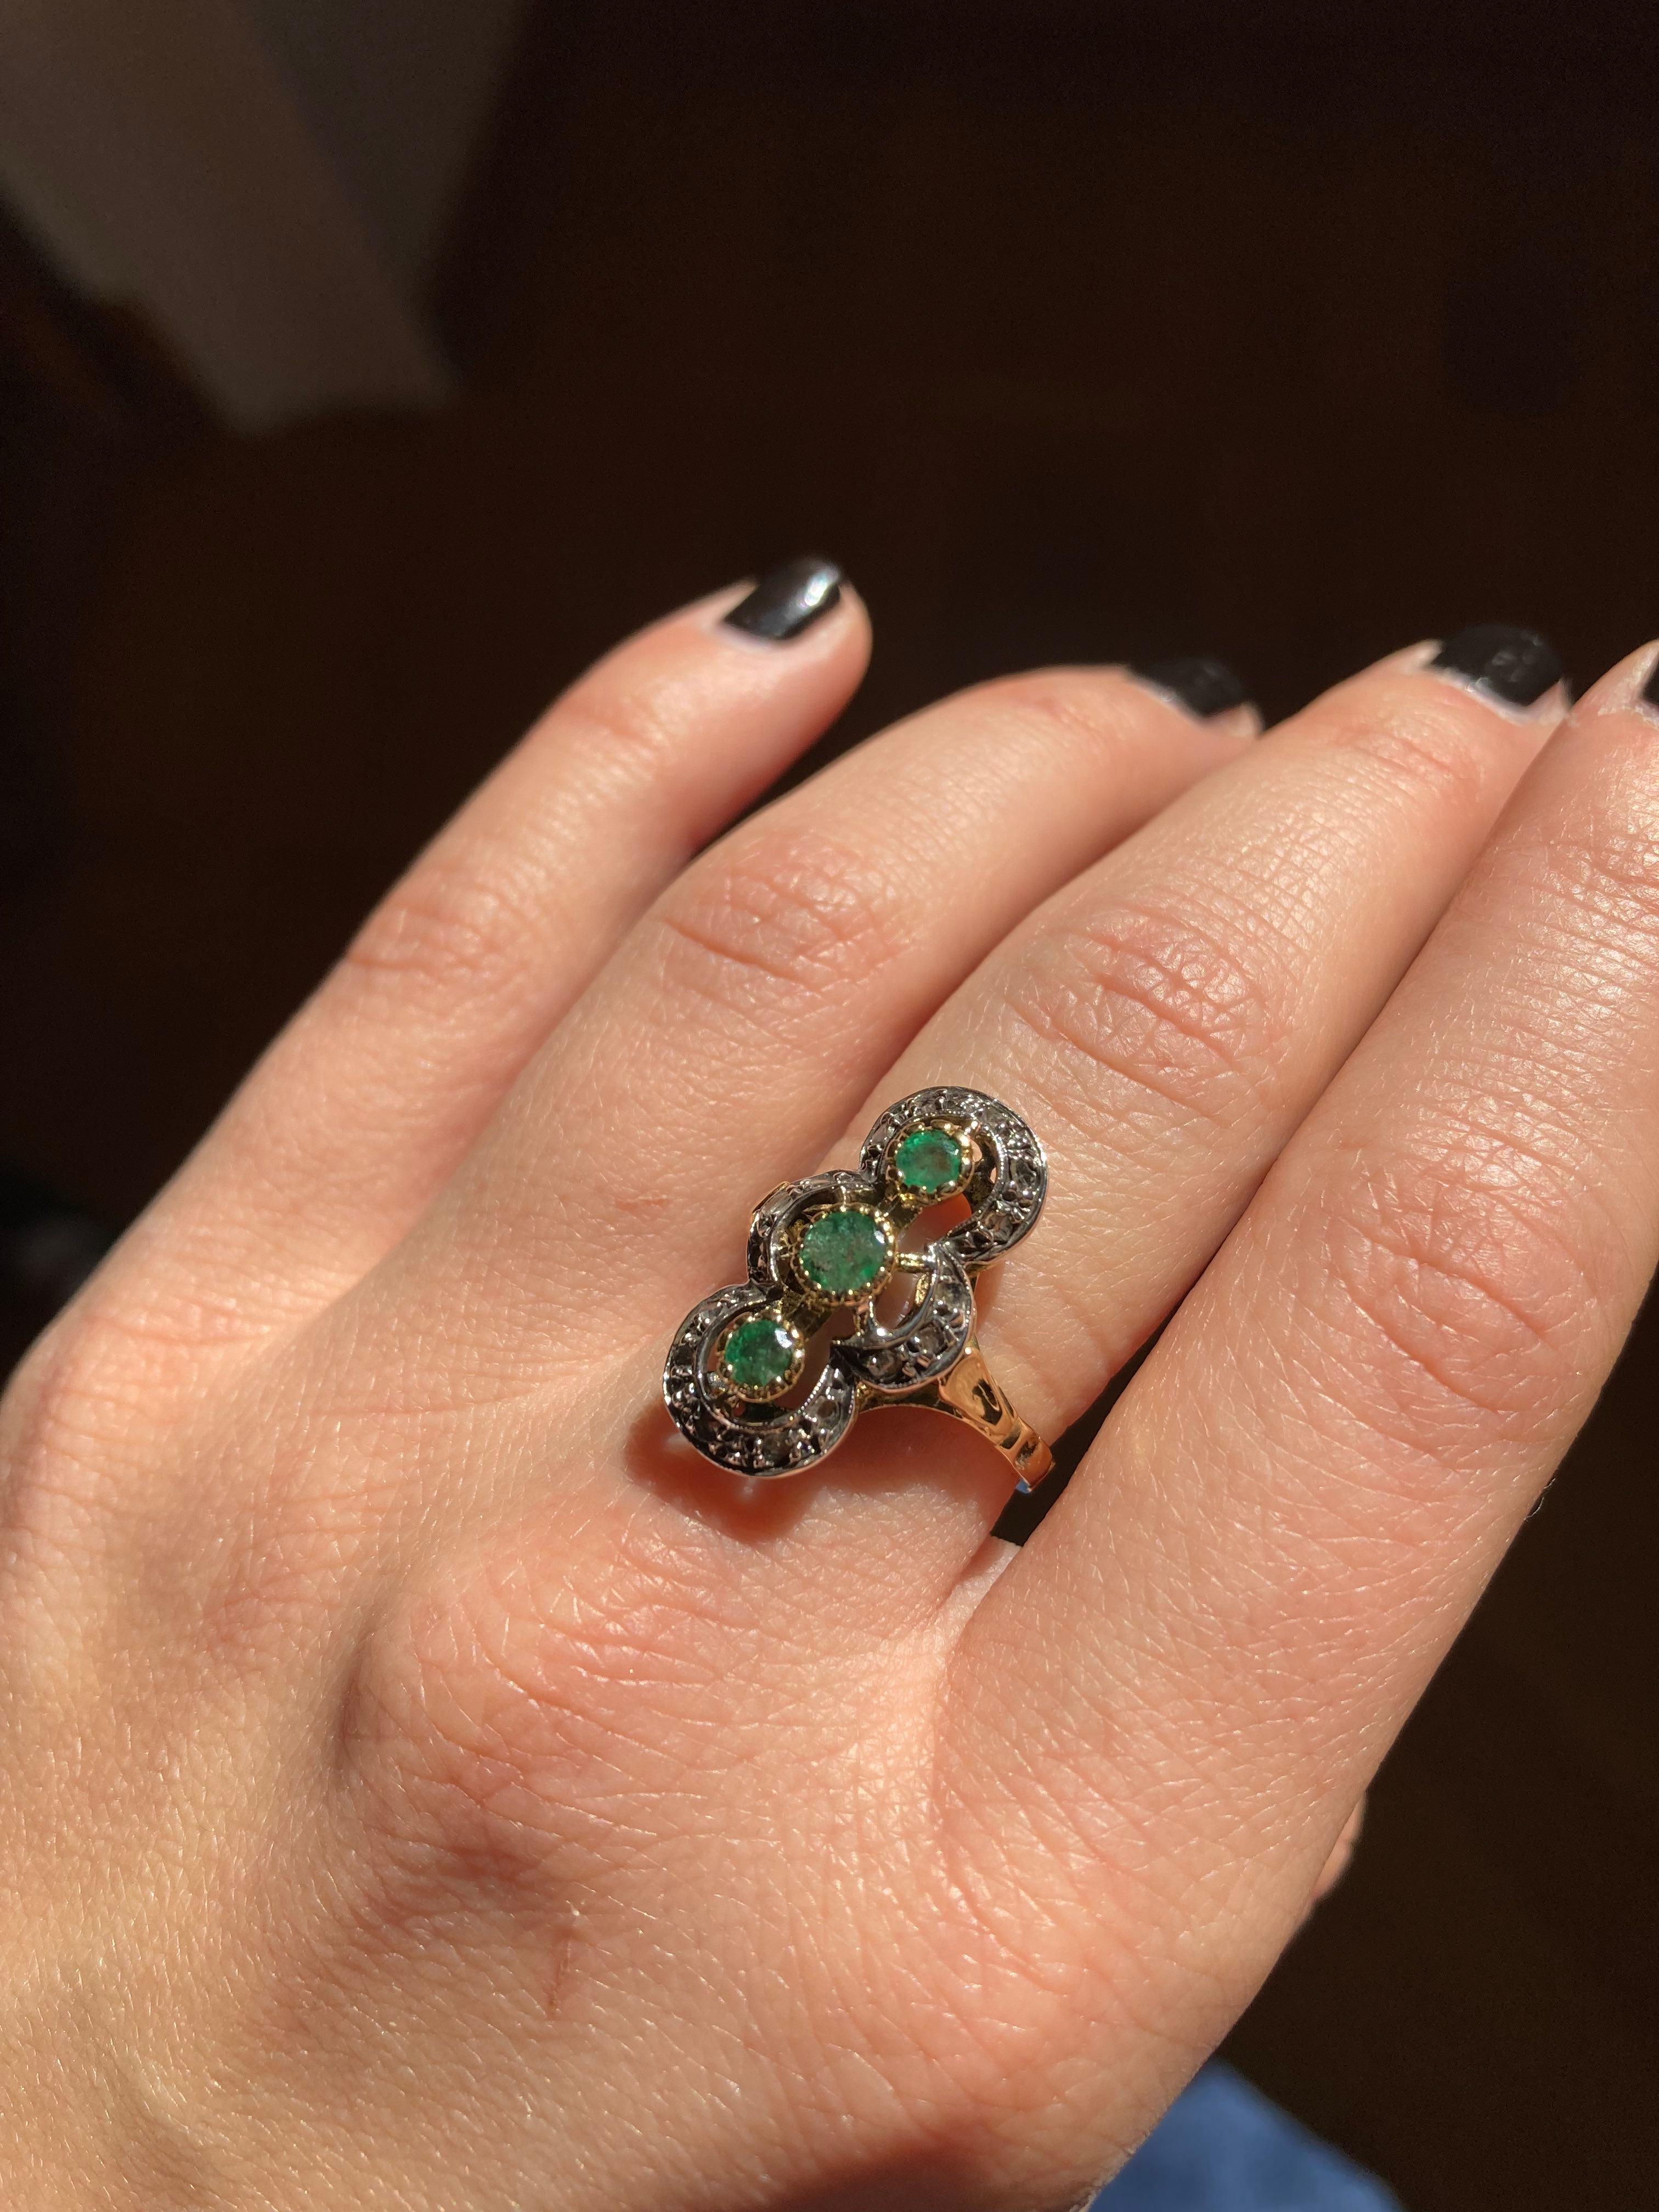 Deco Style Vintage ring made of 18k yellow Gold, three  round-cut, Emeralds . Encircling the Emeralds are a crown of old cut diamonds set in silver creating a captivating design.
Dimension: height 0,82 in. x wide 0,47 in. (cm 2.1 x 2.2cm) 
Ring